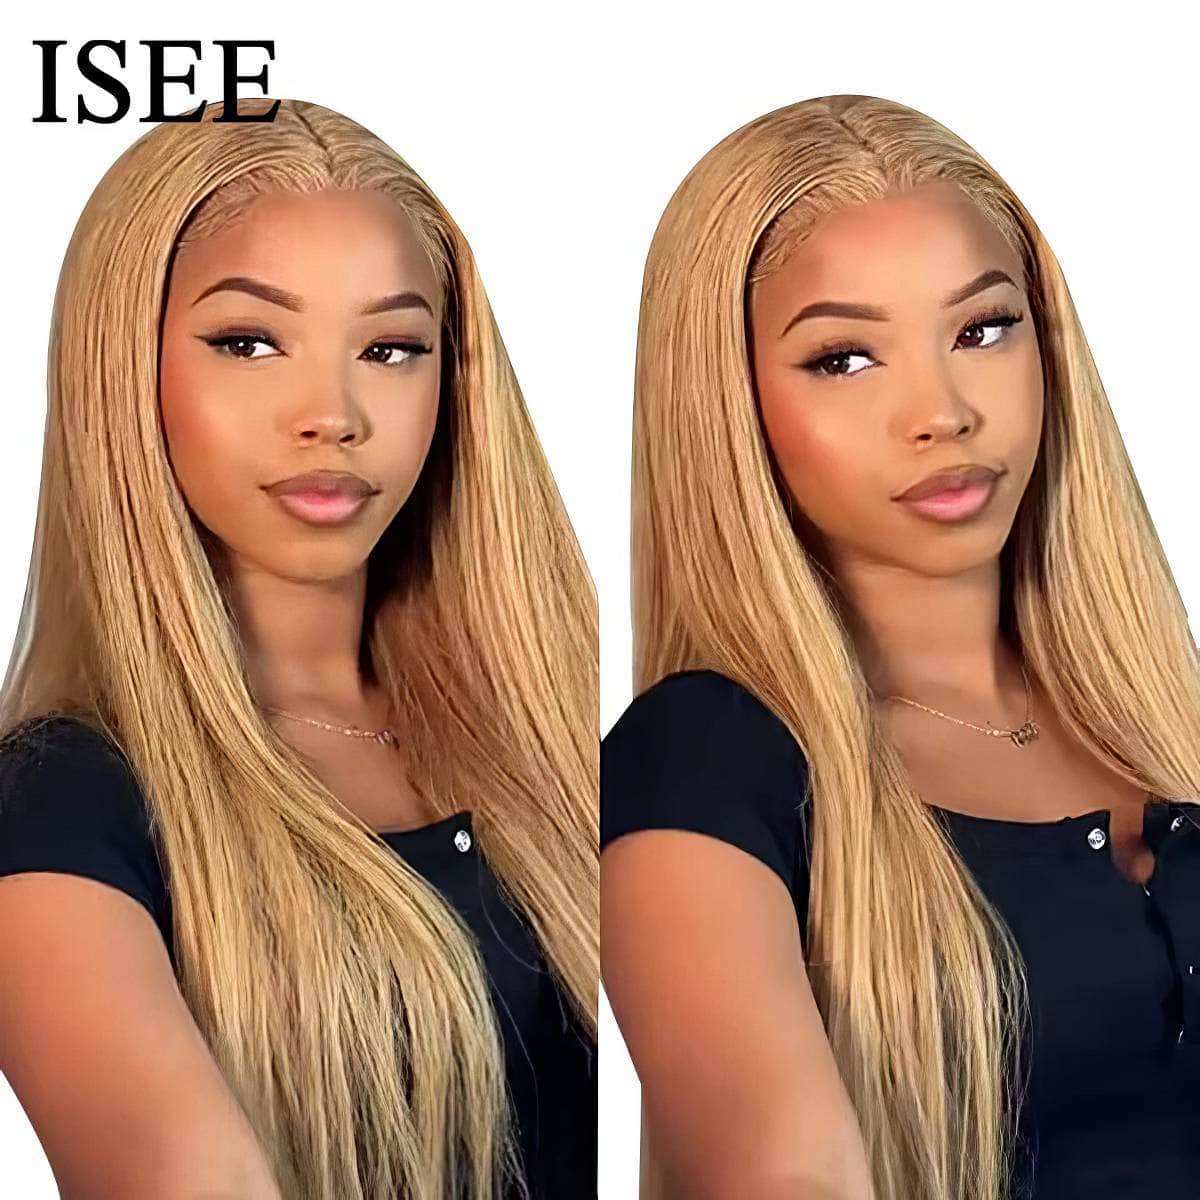 Wear And Go Honey Blonde Wig - Glueless HD Straight Lace Front Wigs, Human Hair, #27 Color, Pre-Cut, Pre-Plucked Closure Wig Wear Go Wig / 18inches